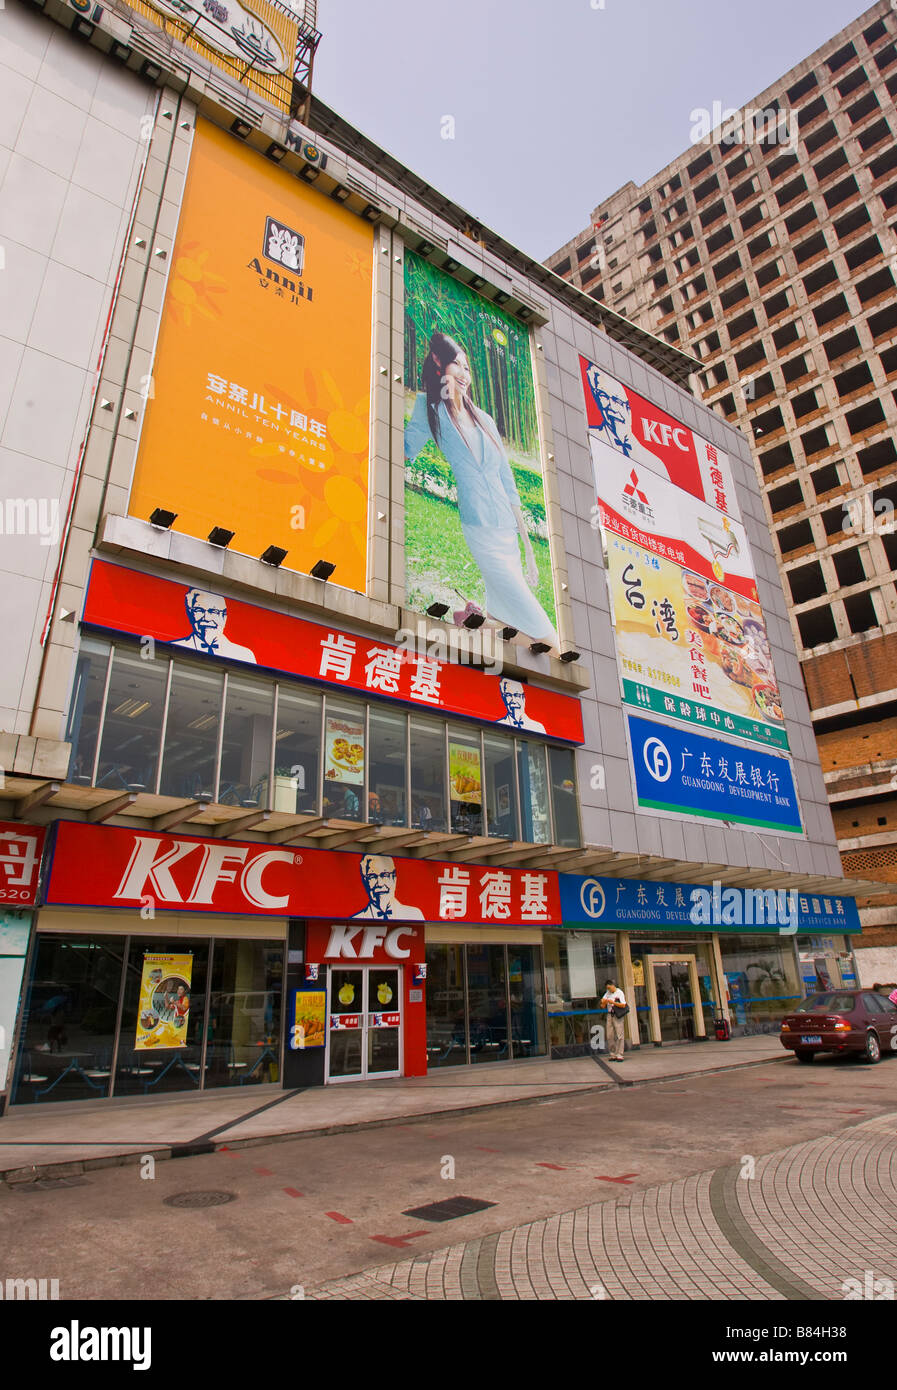 ZHUHAI, GUANGDONG PROVINCE, CHINA - Kentucky Fried Chicken fast food restaurant exterior with billboards above. Stock Photo